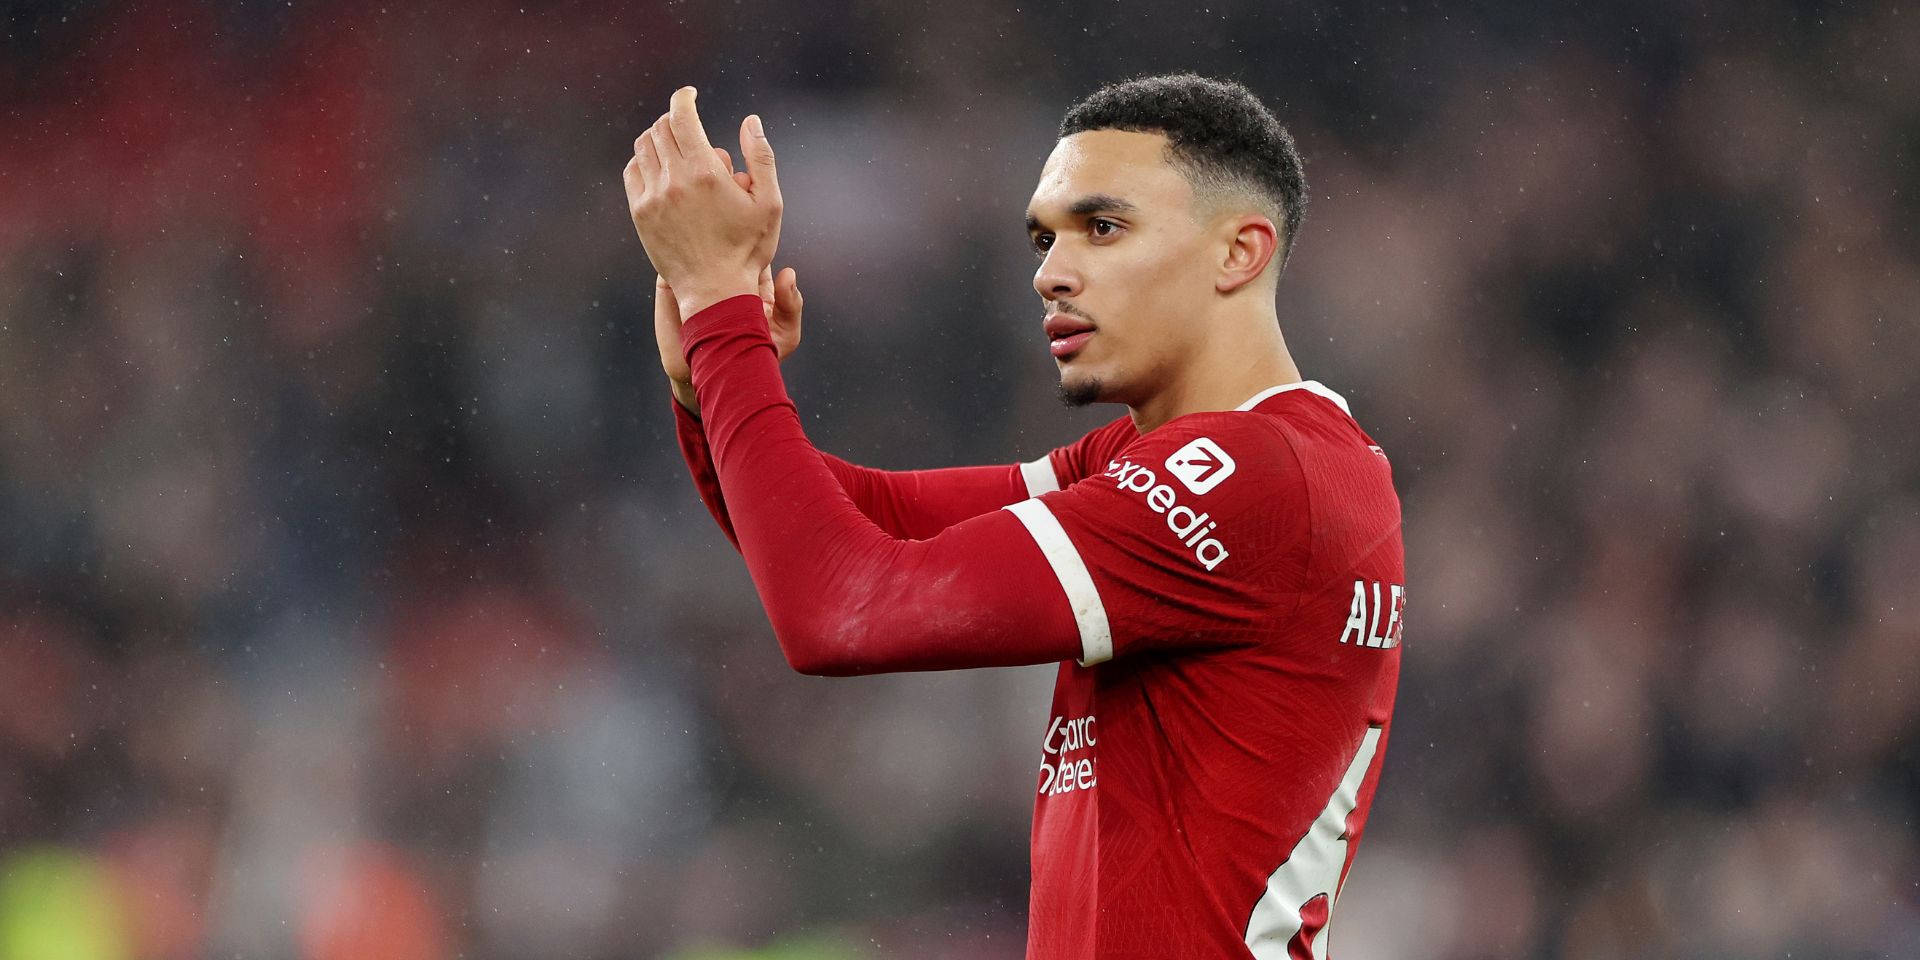 Alexander-Arnold says Liverpool teammate is ‘credit to himself’ after recent performances